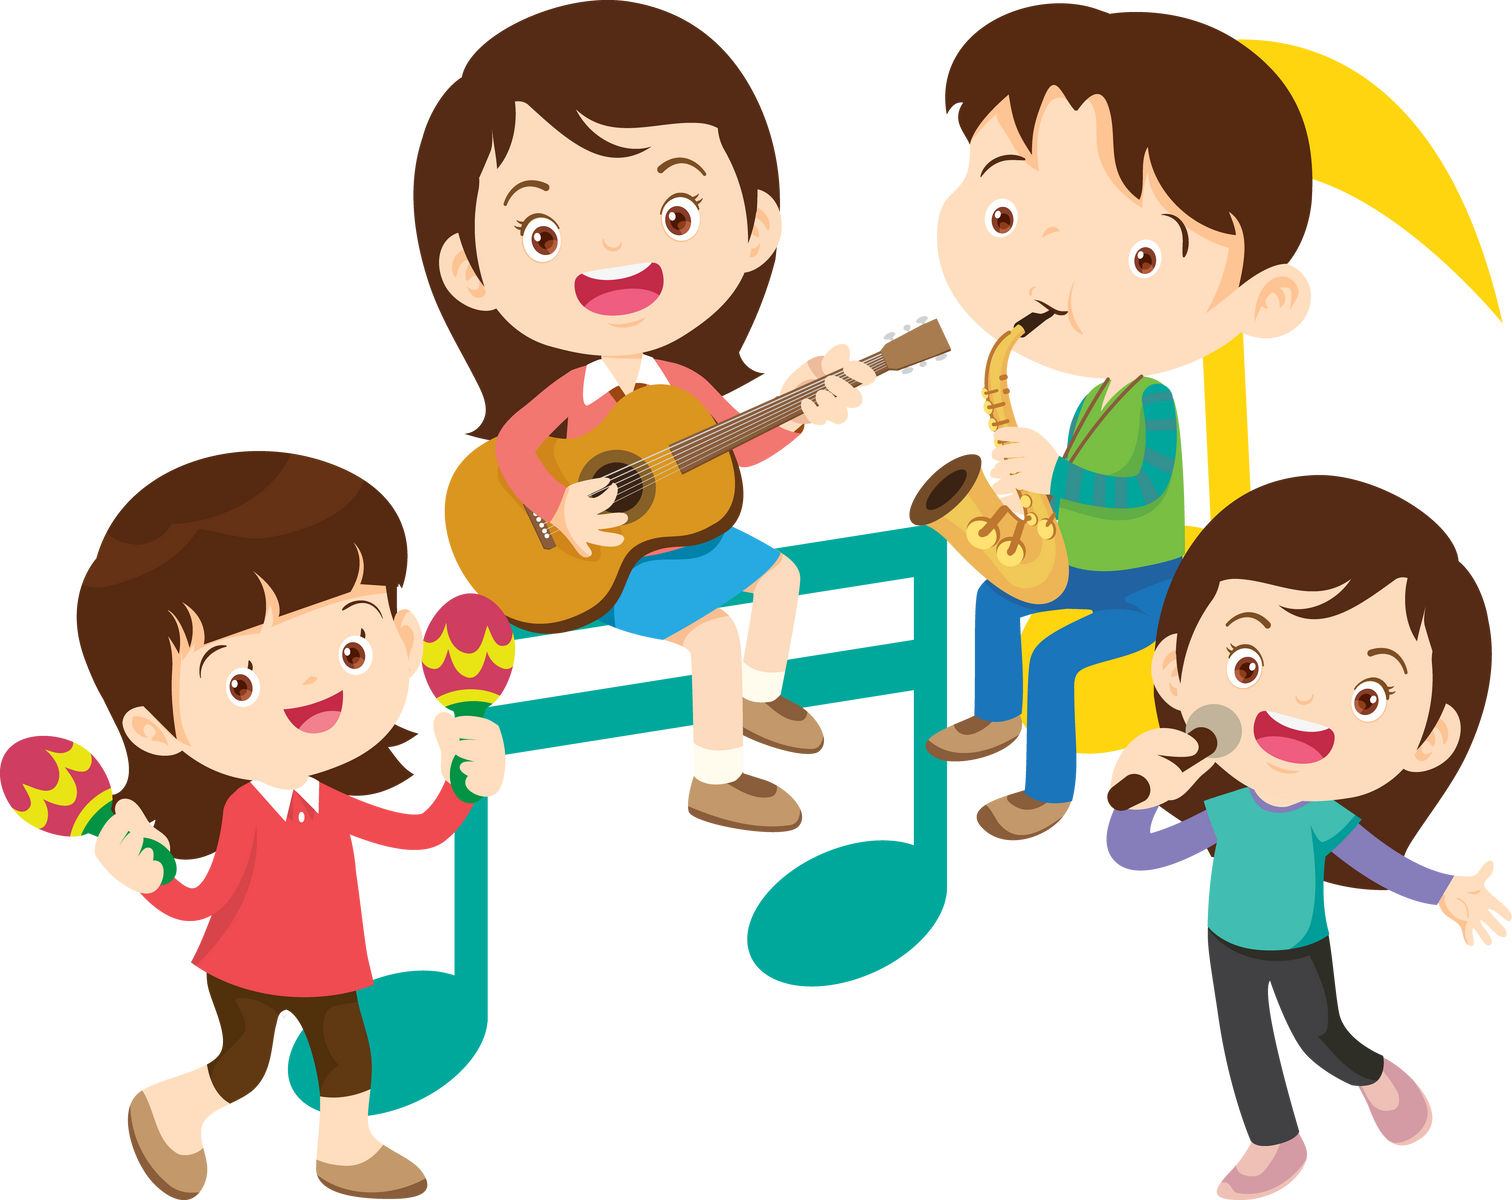 Children sing and Playing Musical instruments music kids